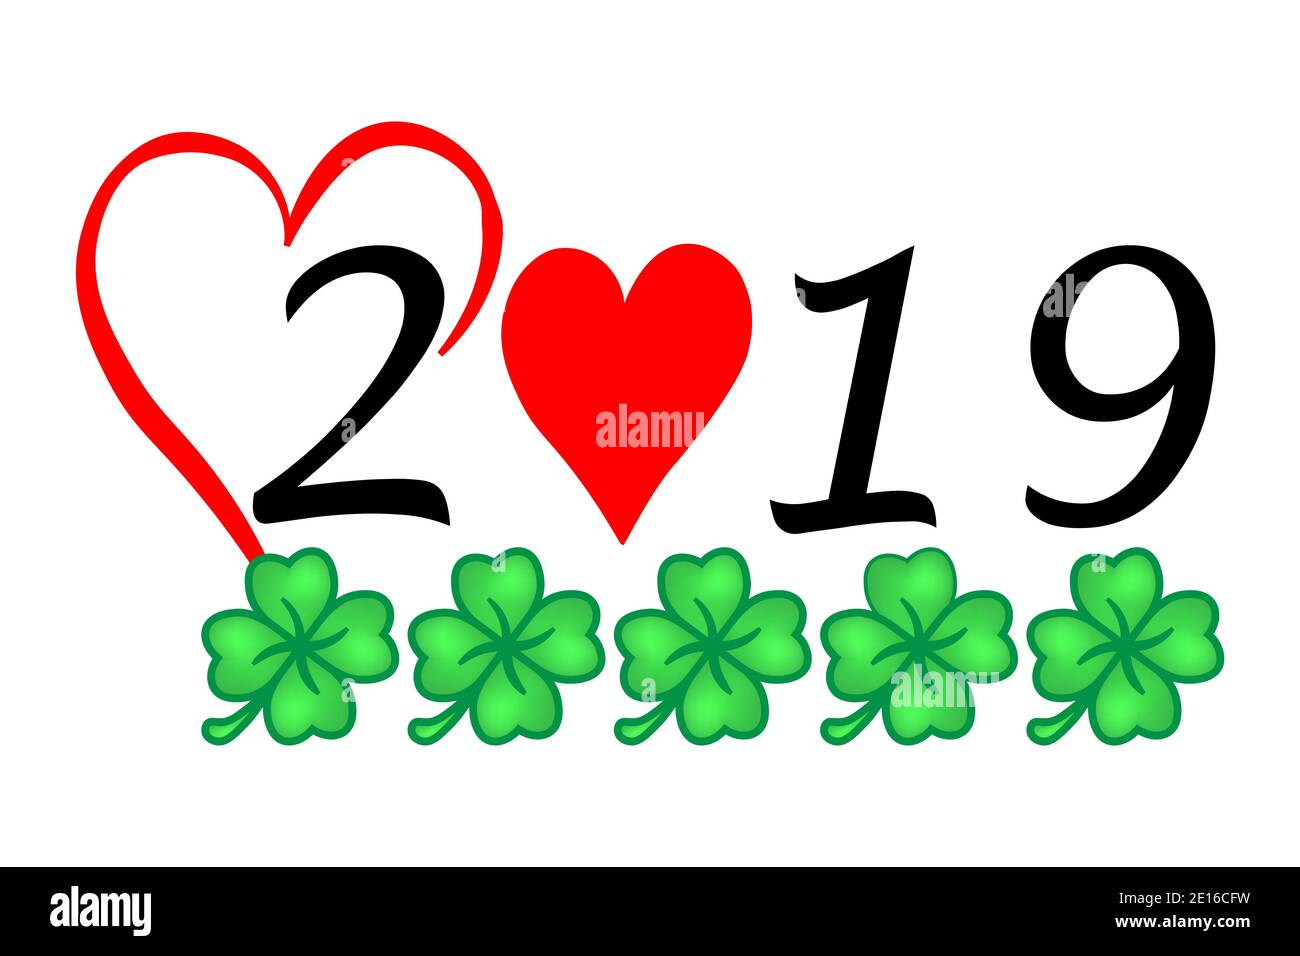 Year 2019 With Luck And Heart Stock Photo